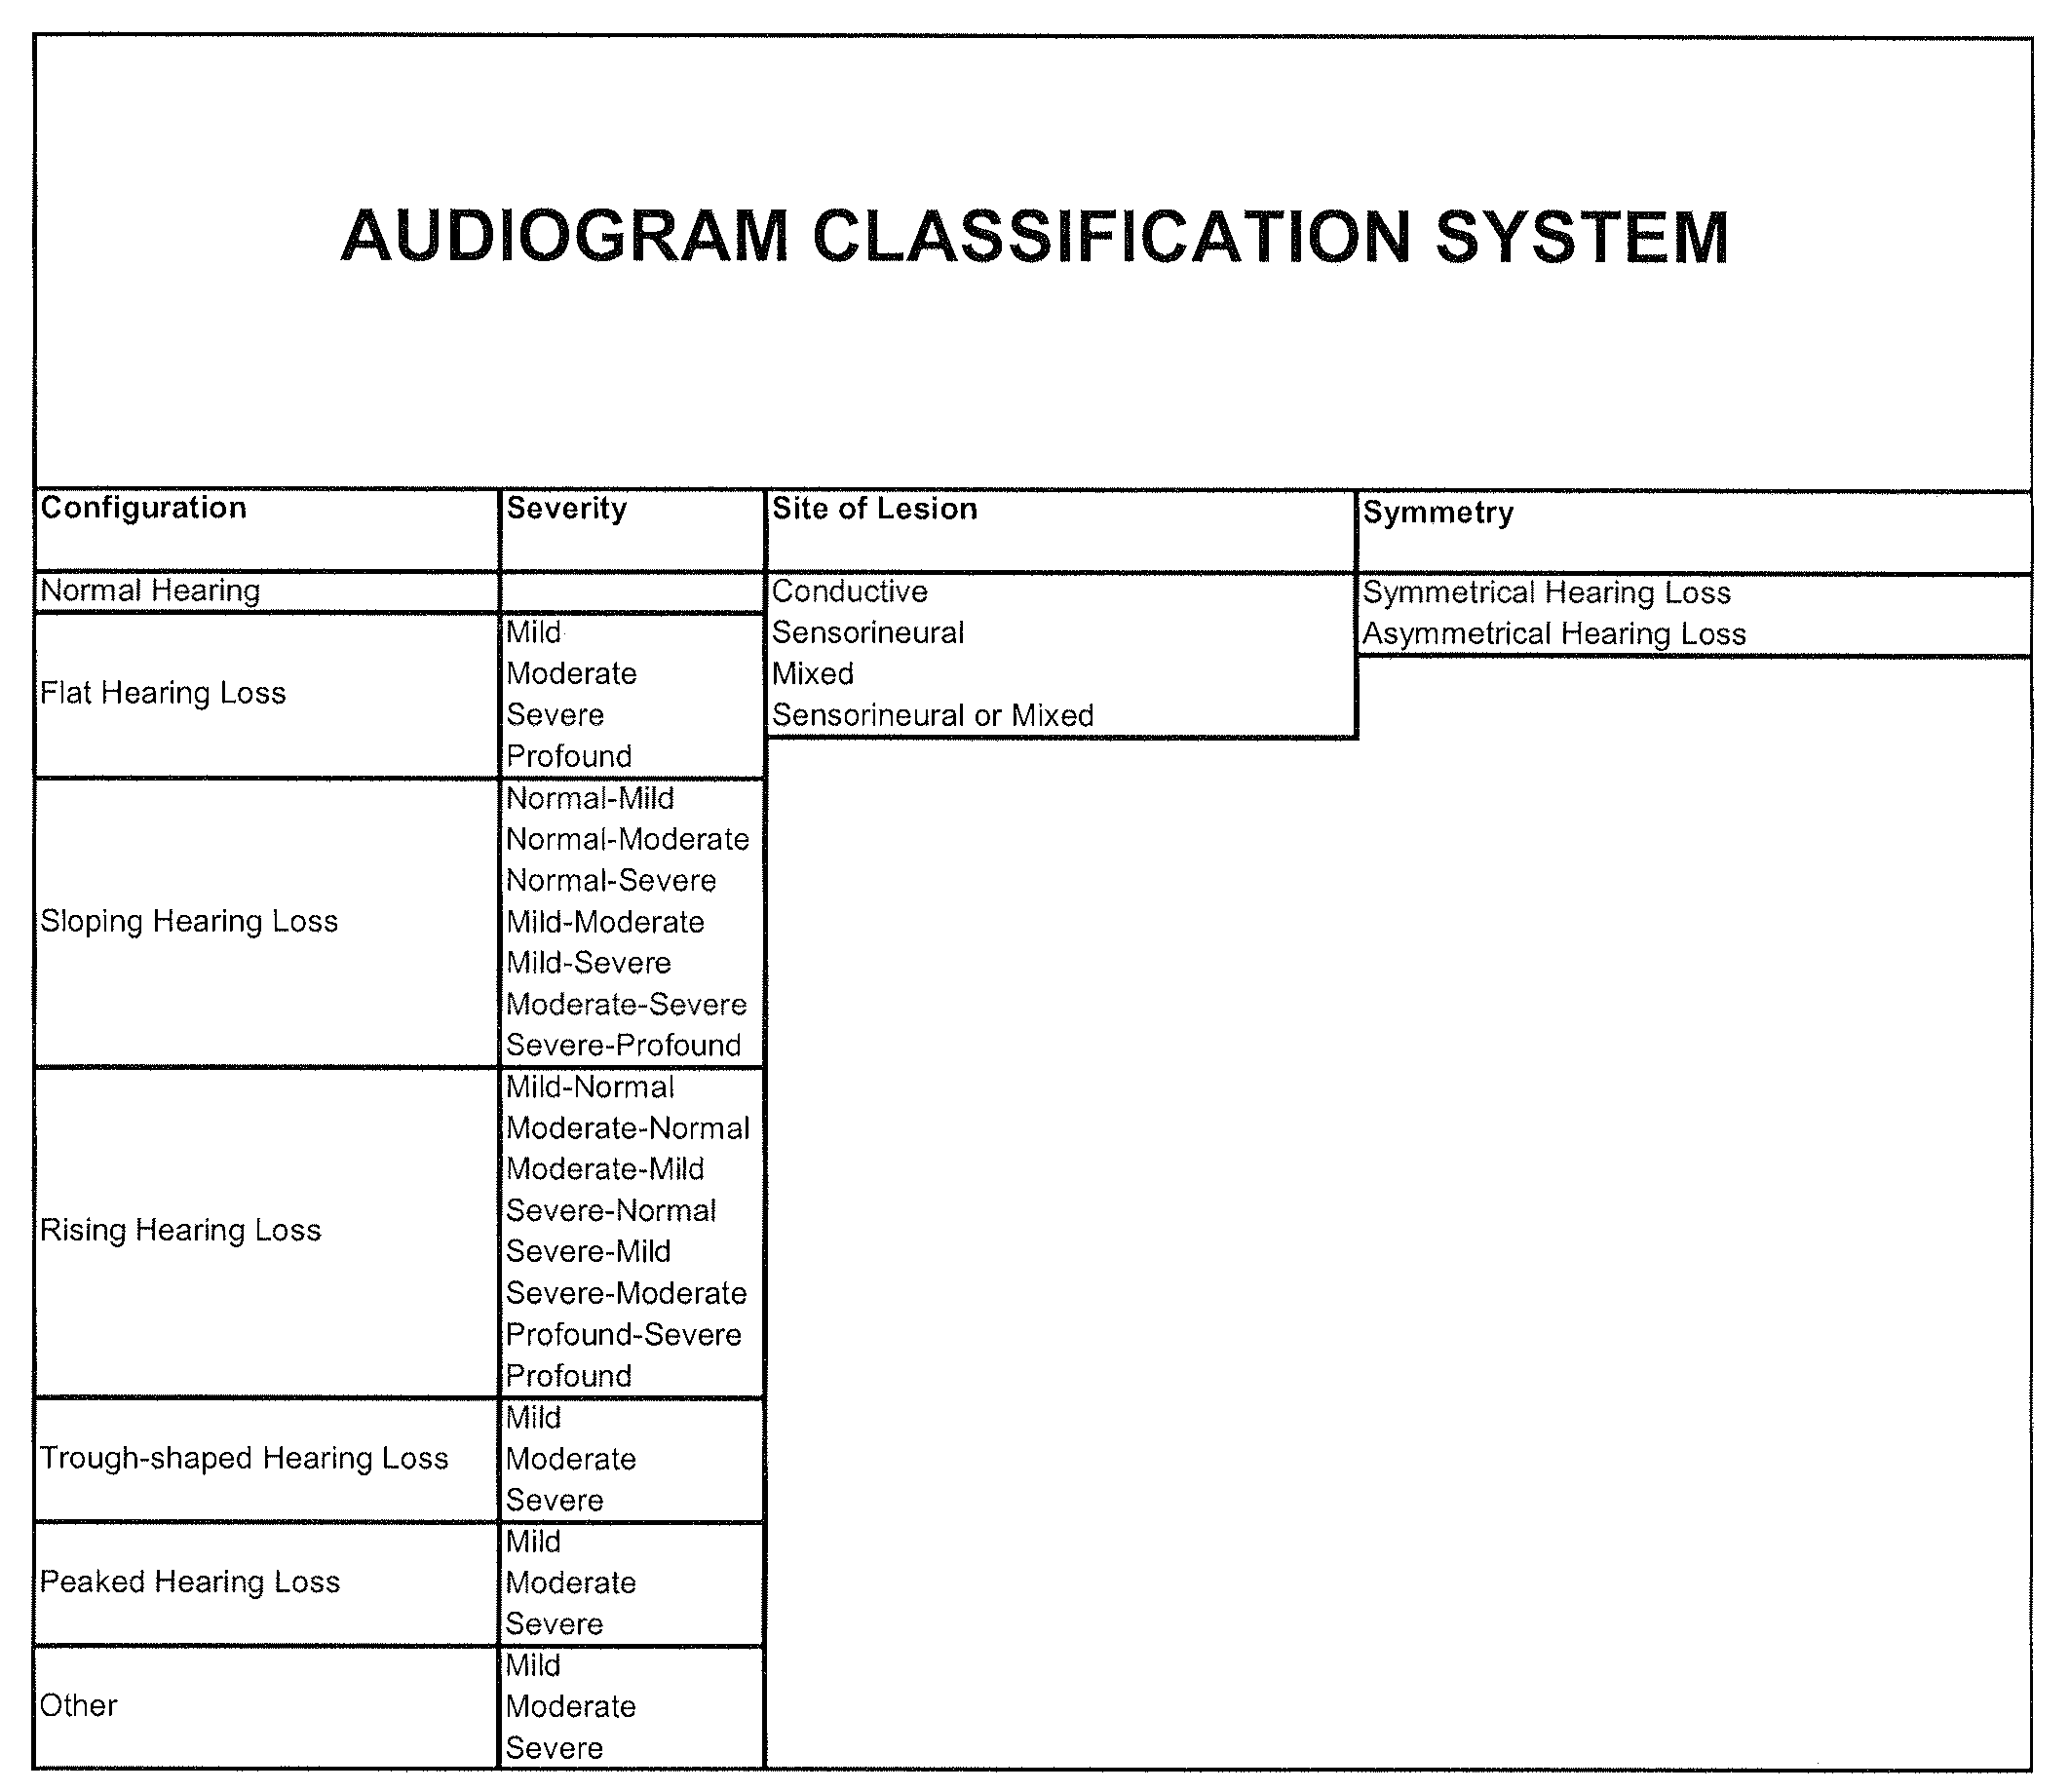 Audiogram classification system